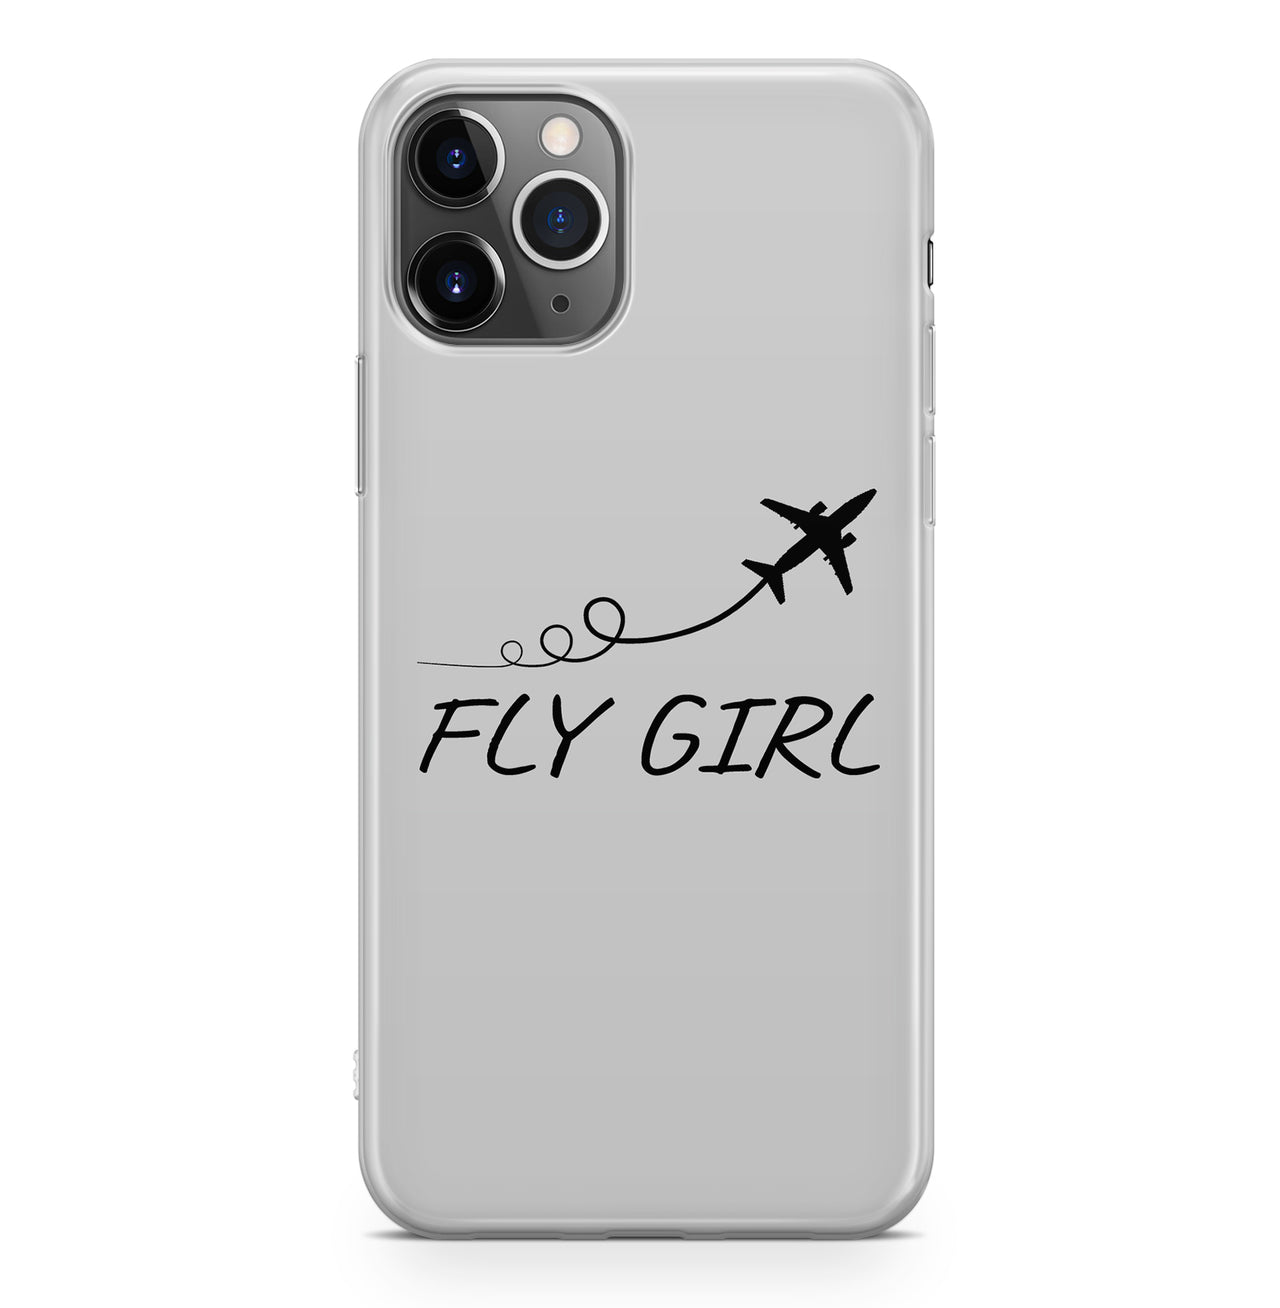 Just Fly It & Fly Girl Designed iPhone Cases